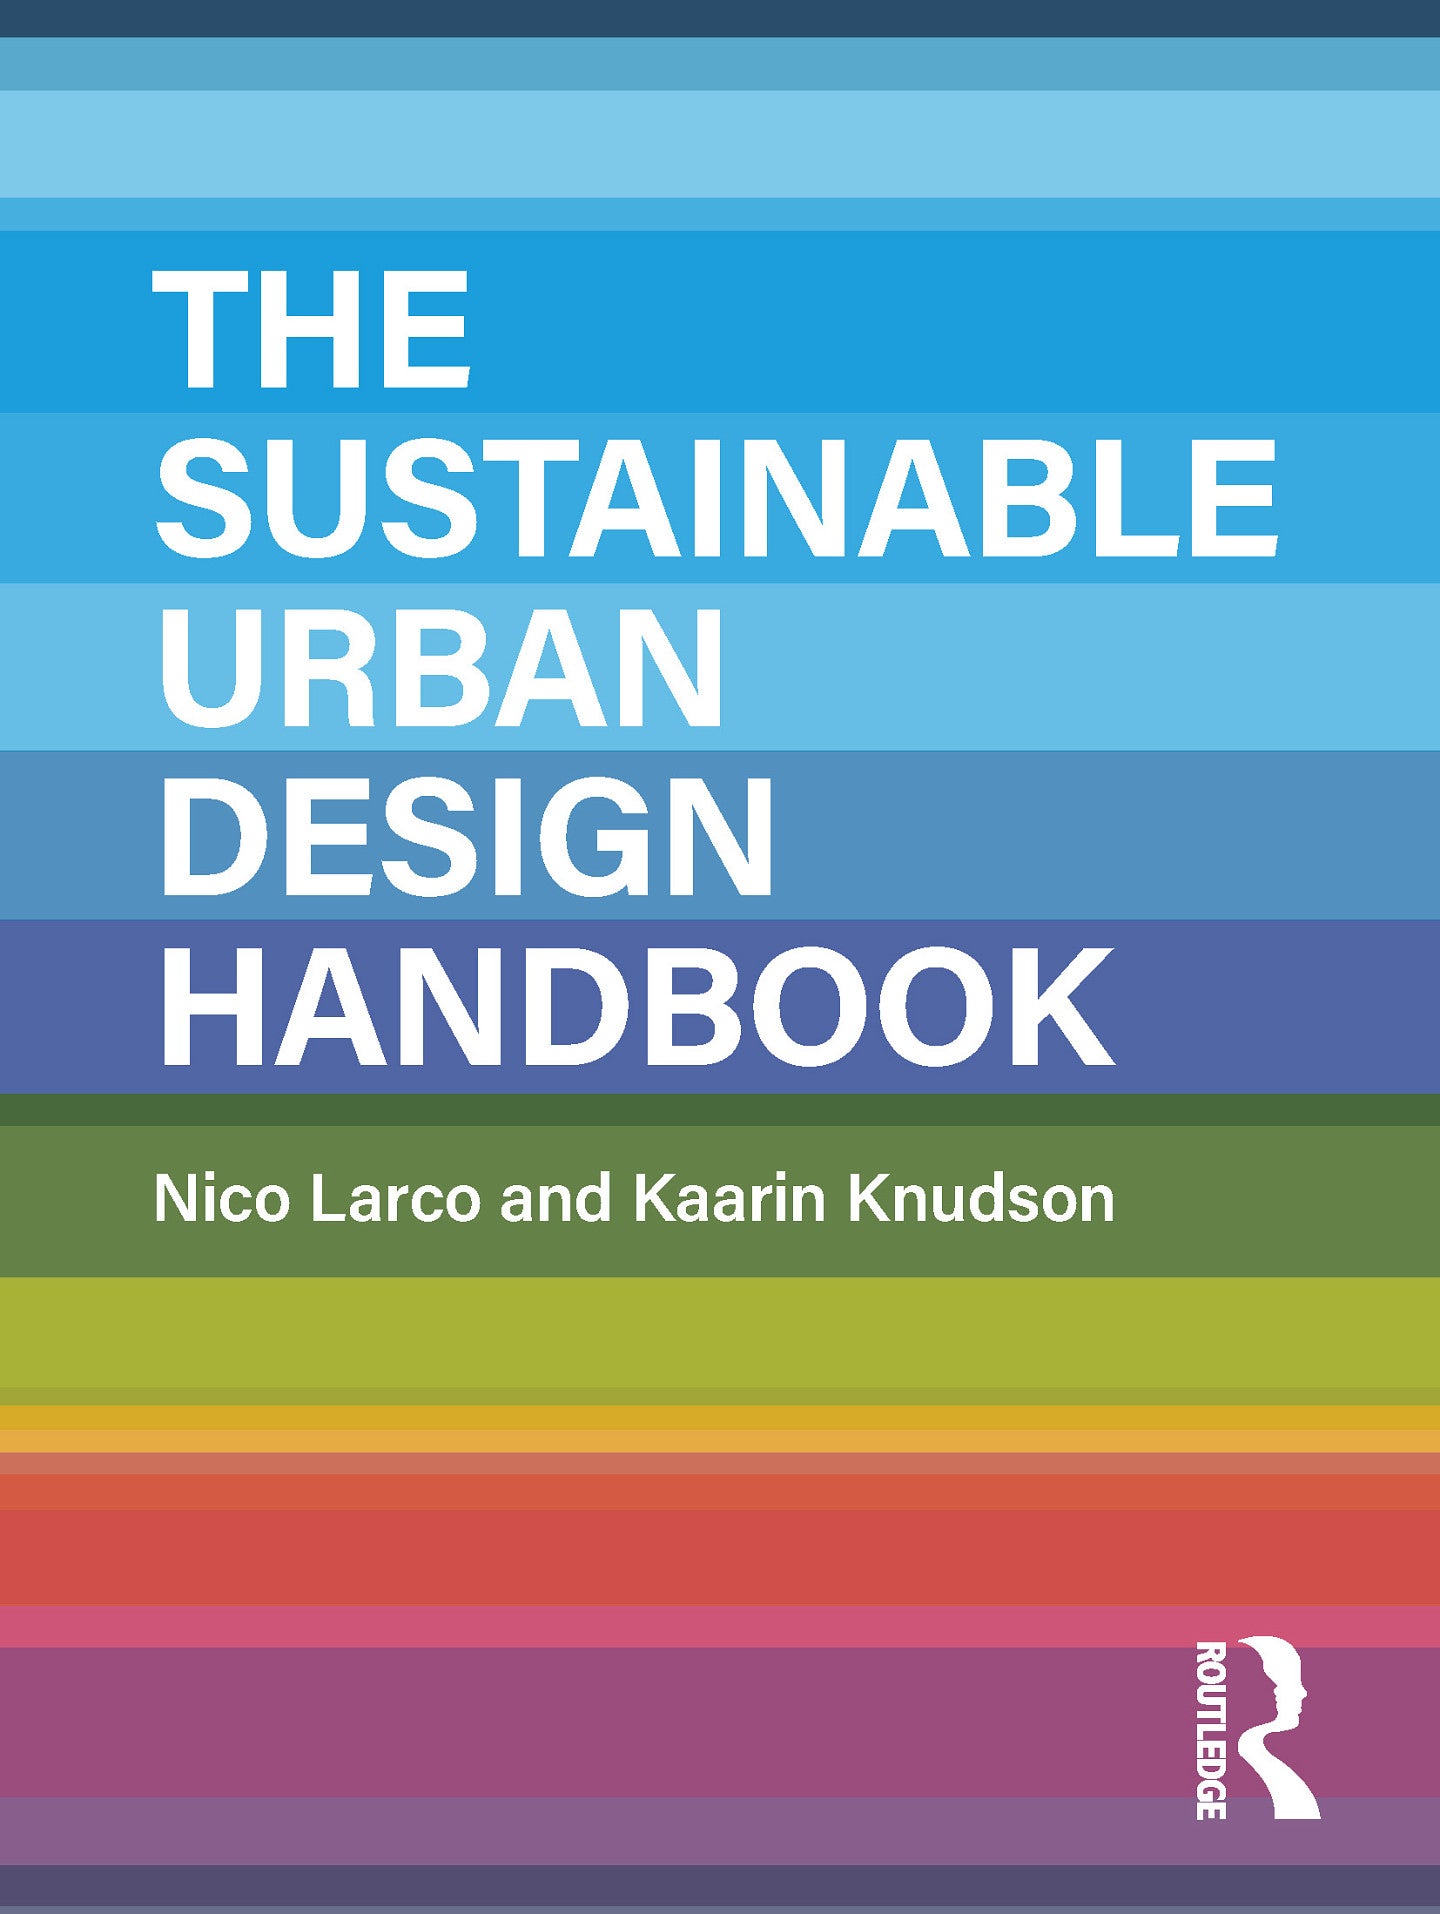 Cover design for Nico Larco and Kaarin Knudson's book, The Sustainable Urban Design Handbook. 